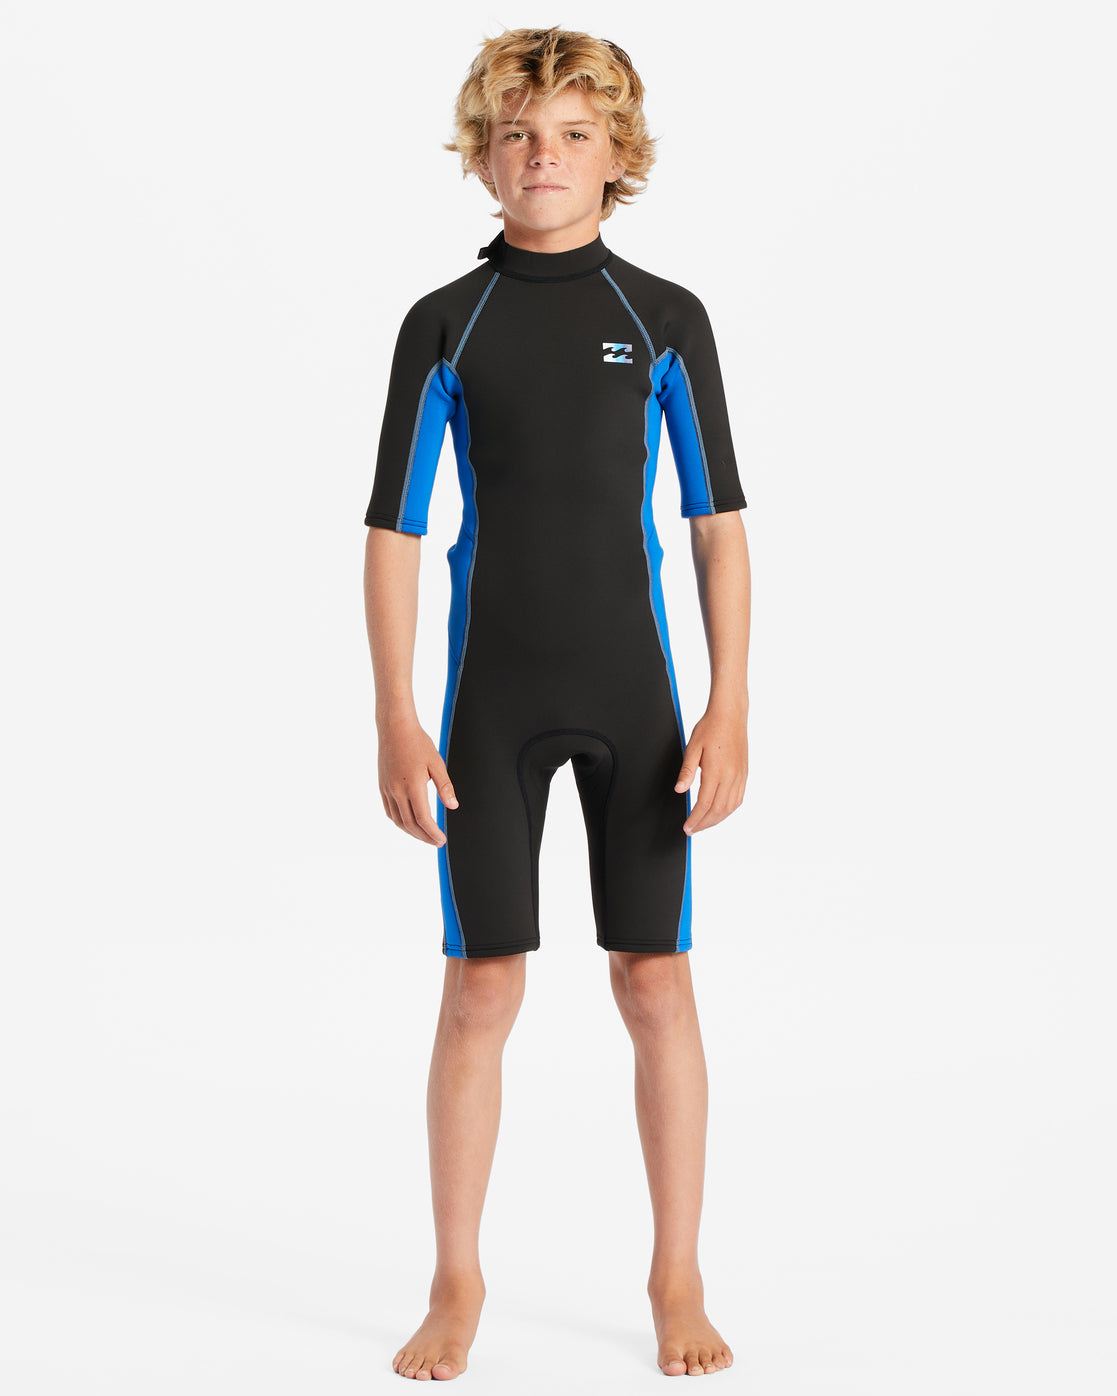 Blond kid wearing the Billabong Boys Absolute 2mm Spring Wetsuit in blue fade